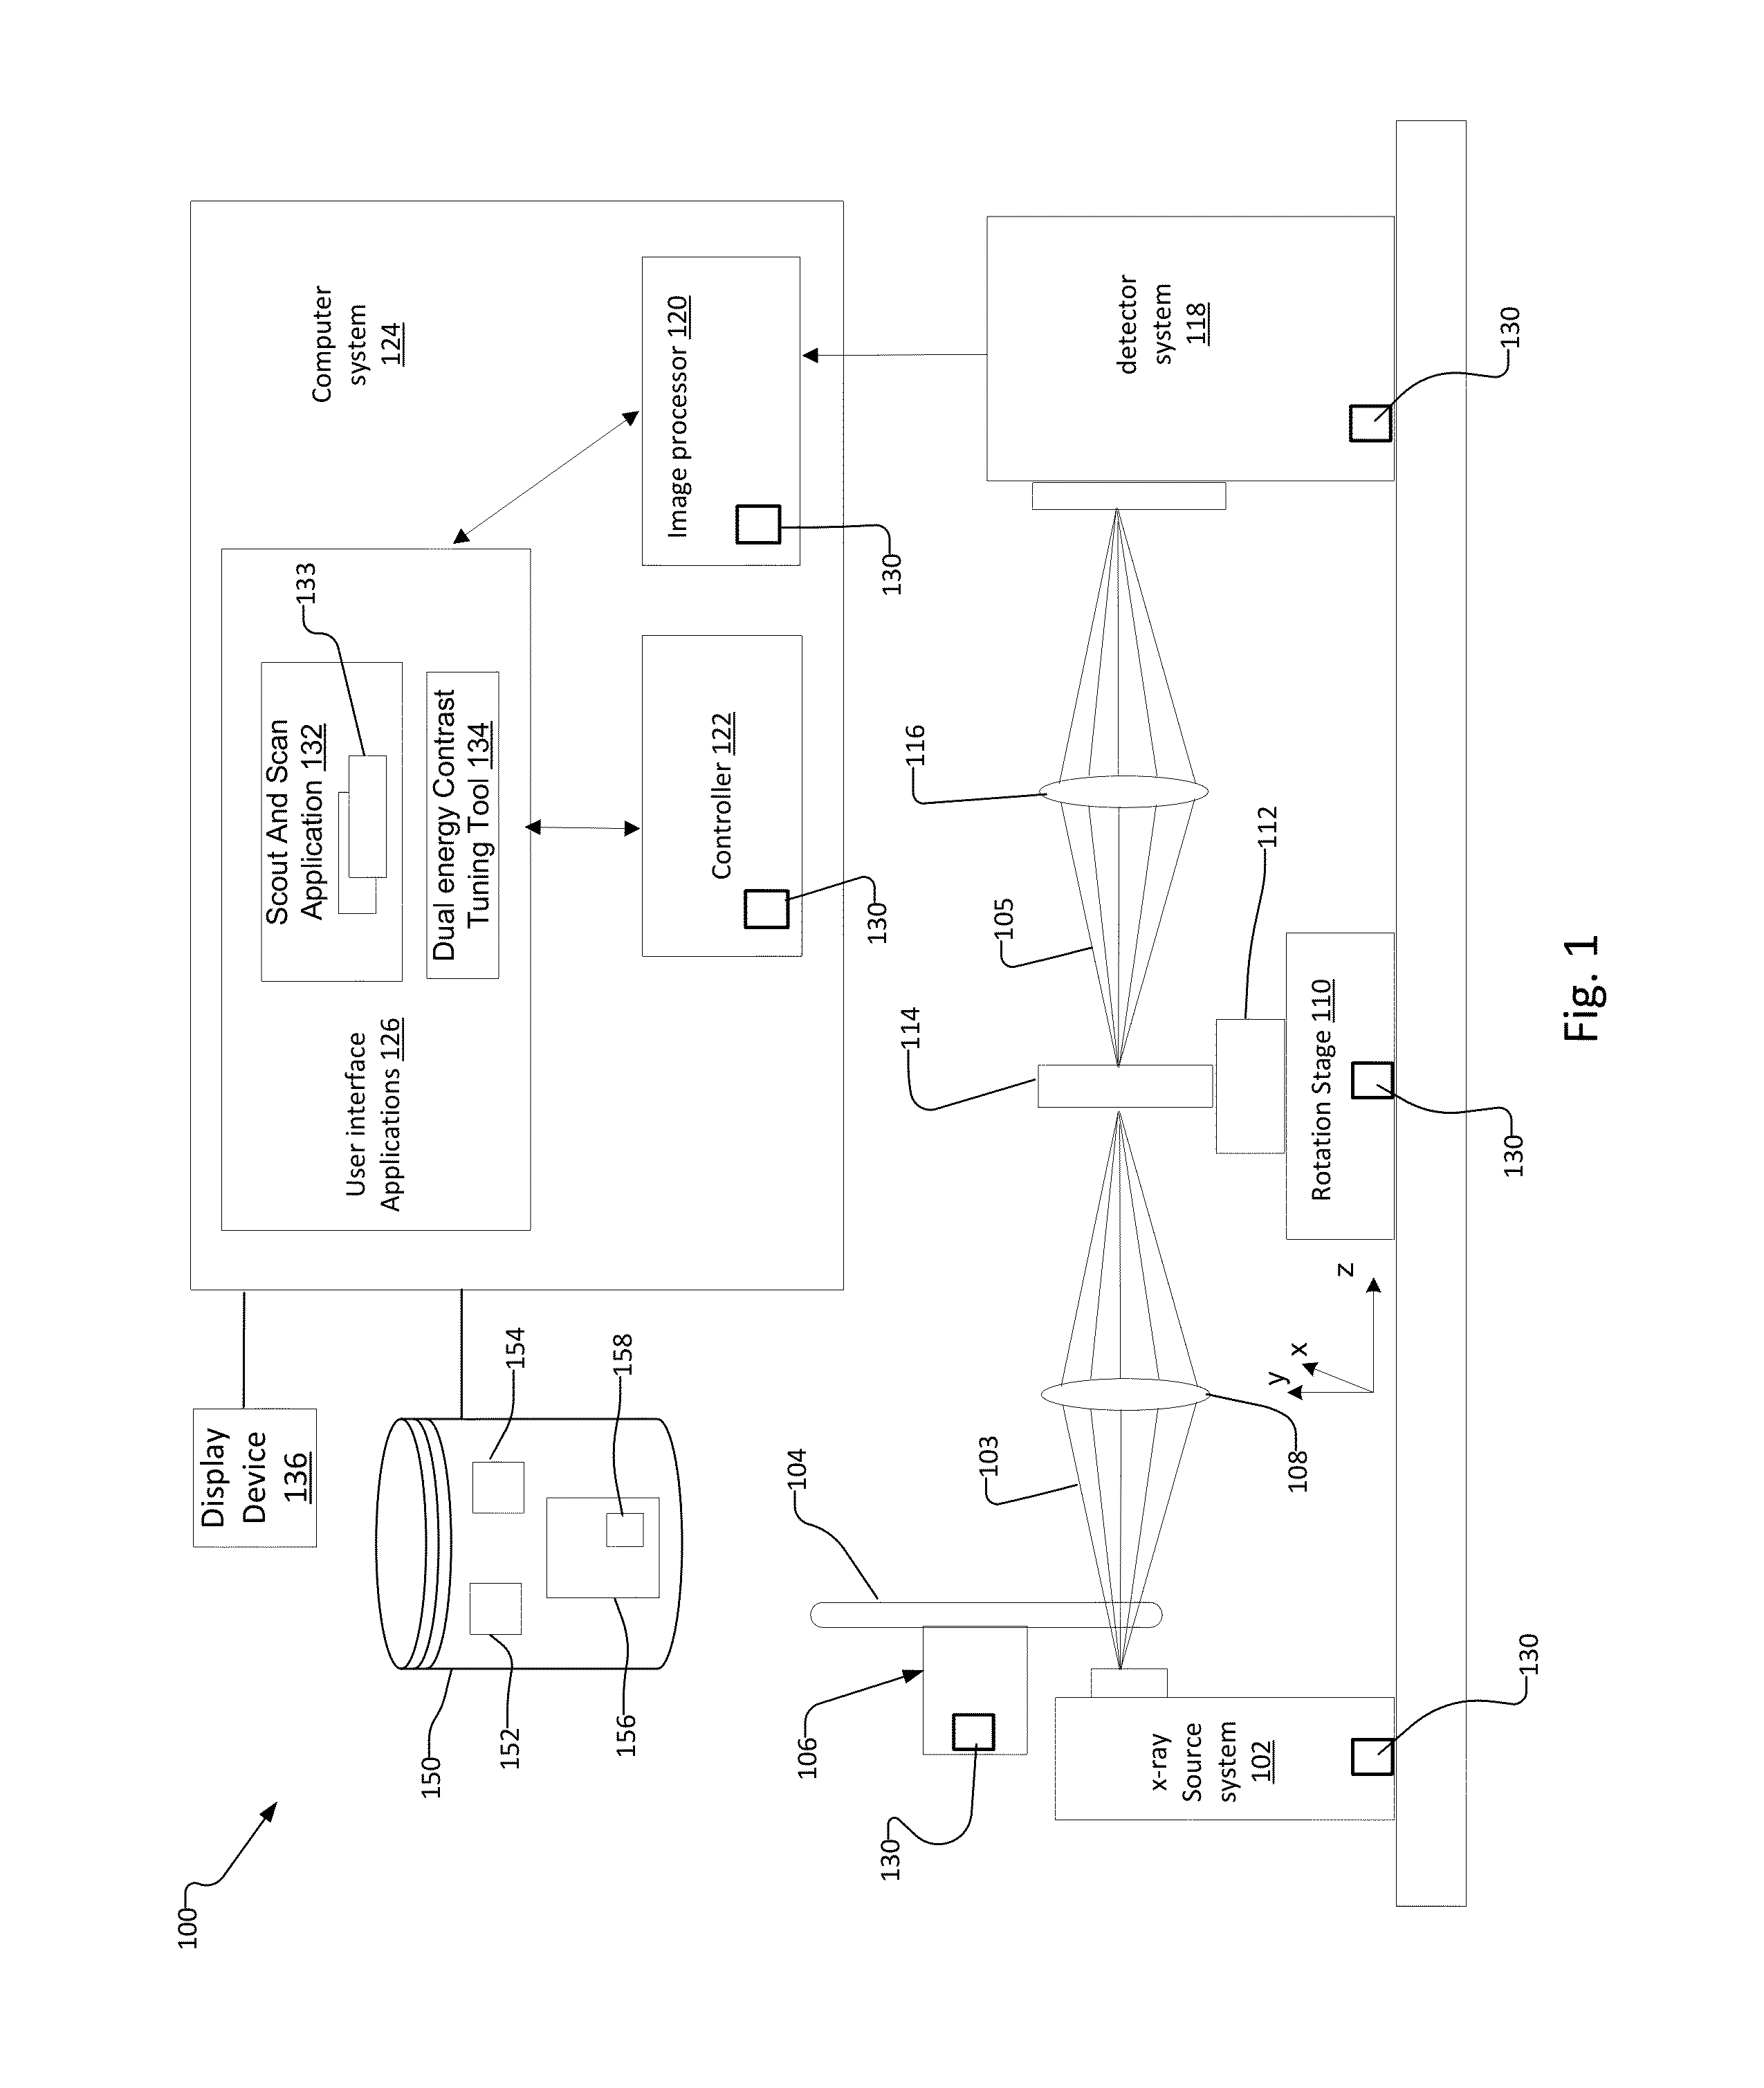 Multi Energy X-Ray Microscope Data Acquisition and Image Reconstruction System and Method